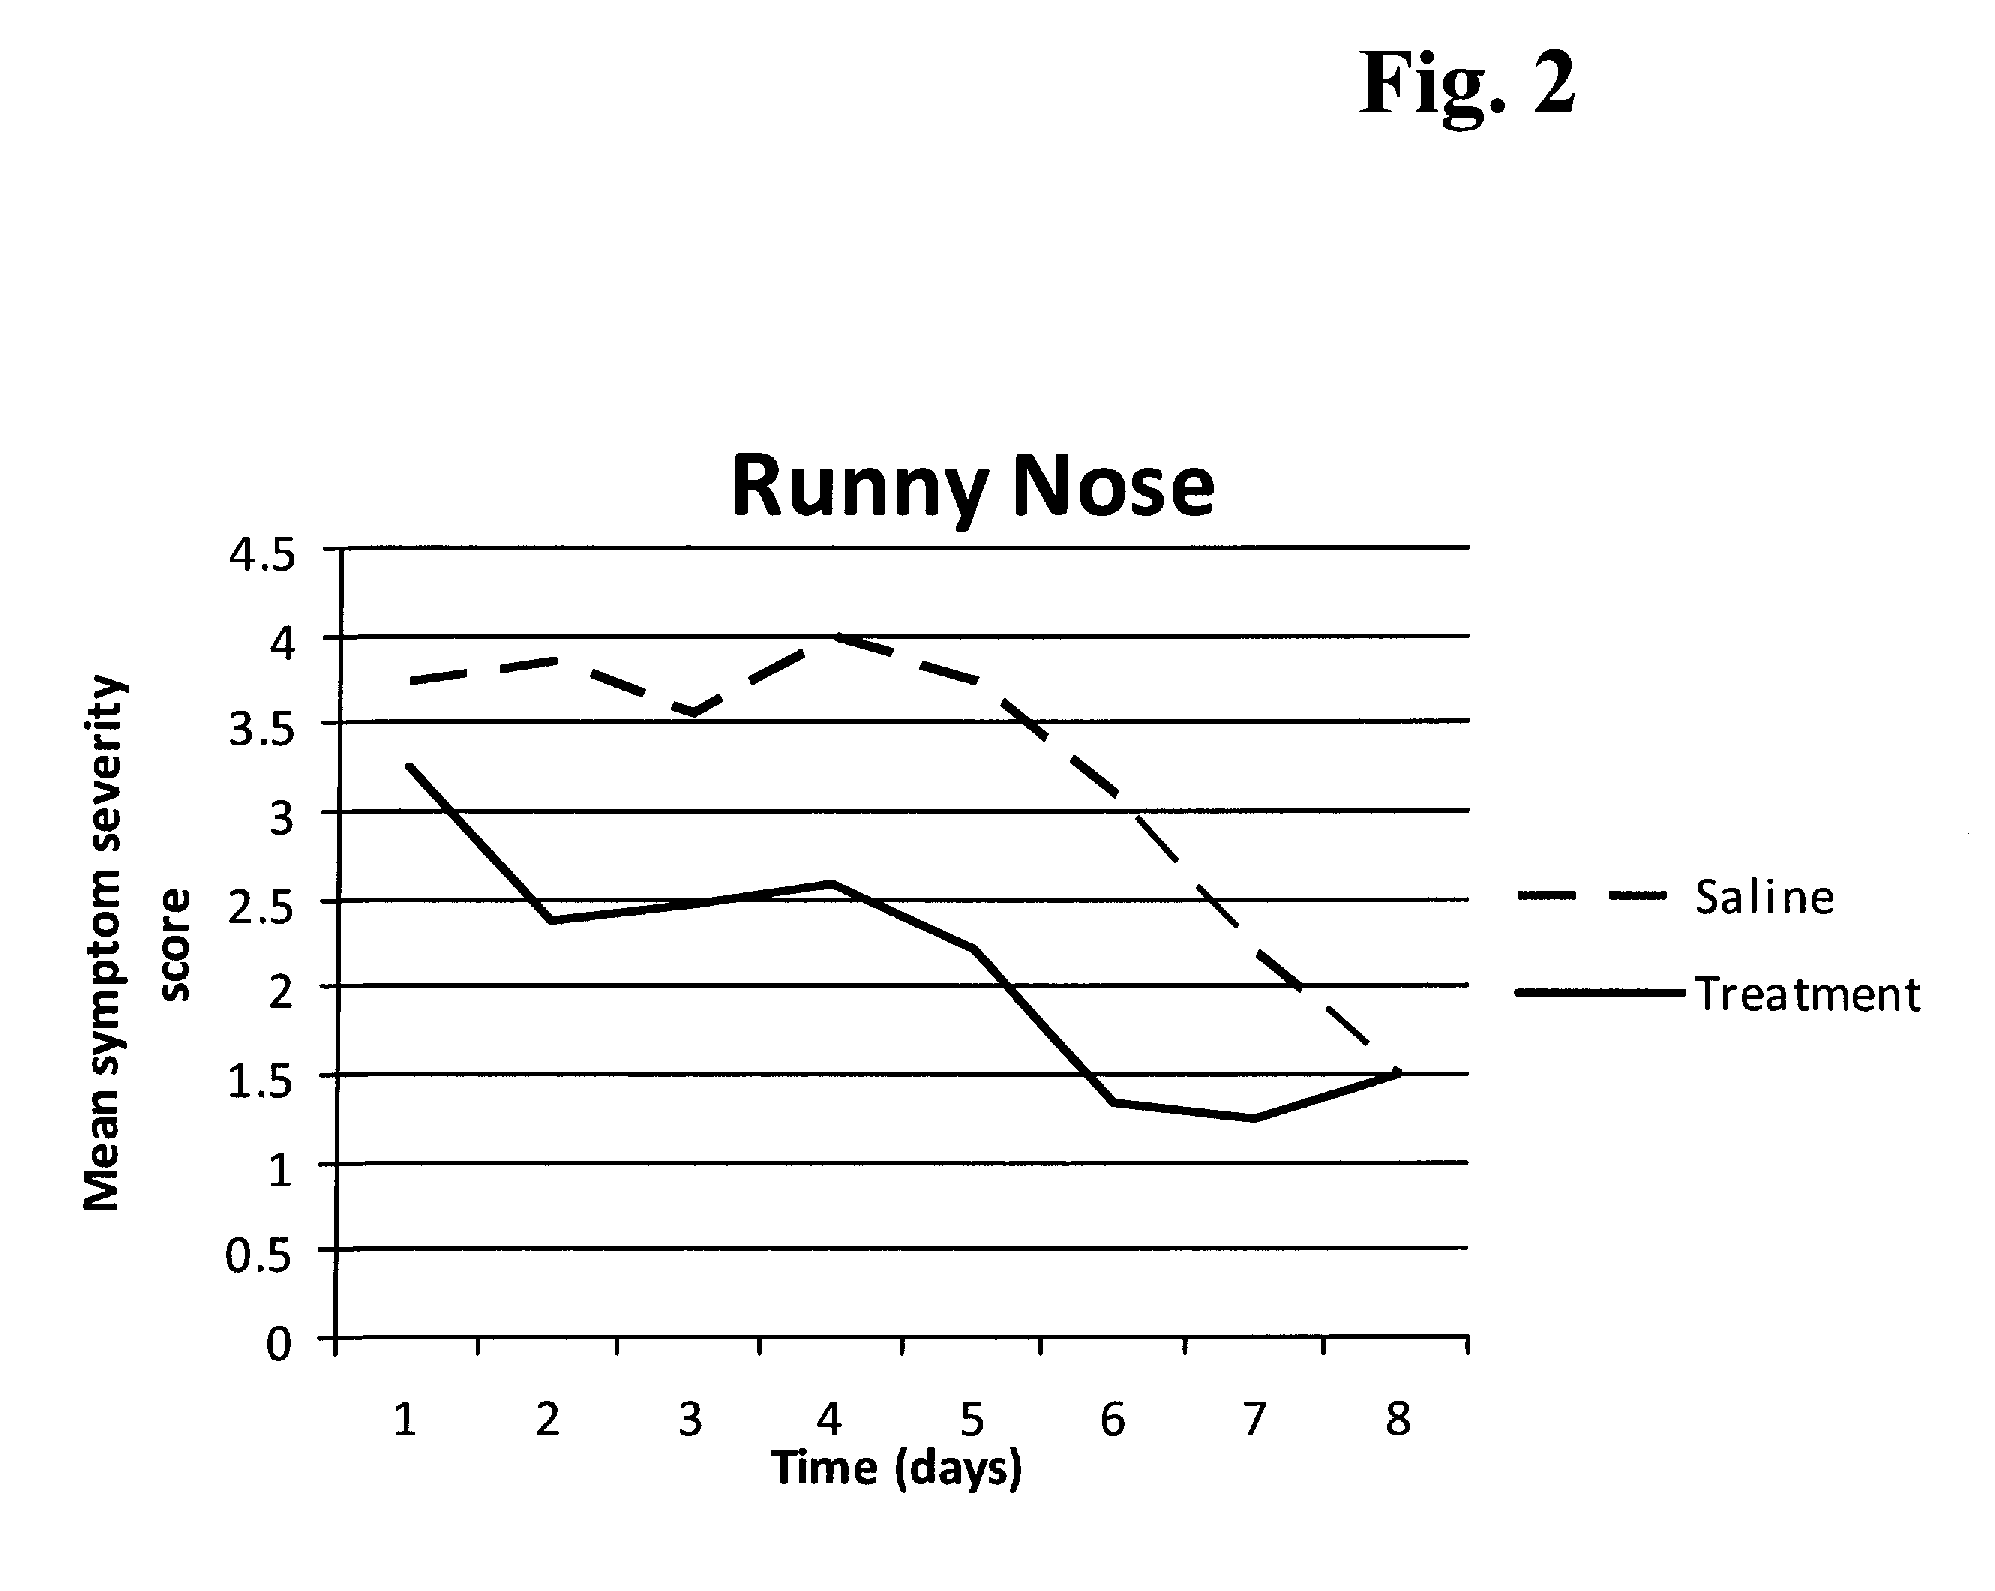 Composition and method for treating colds